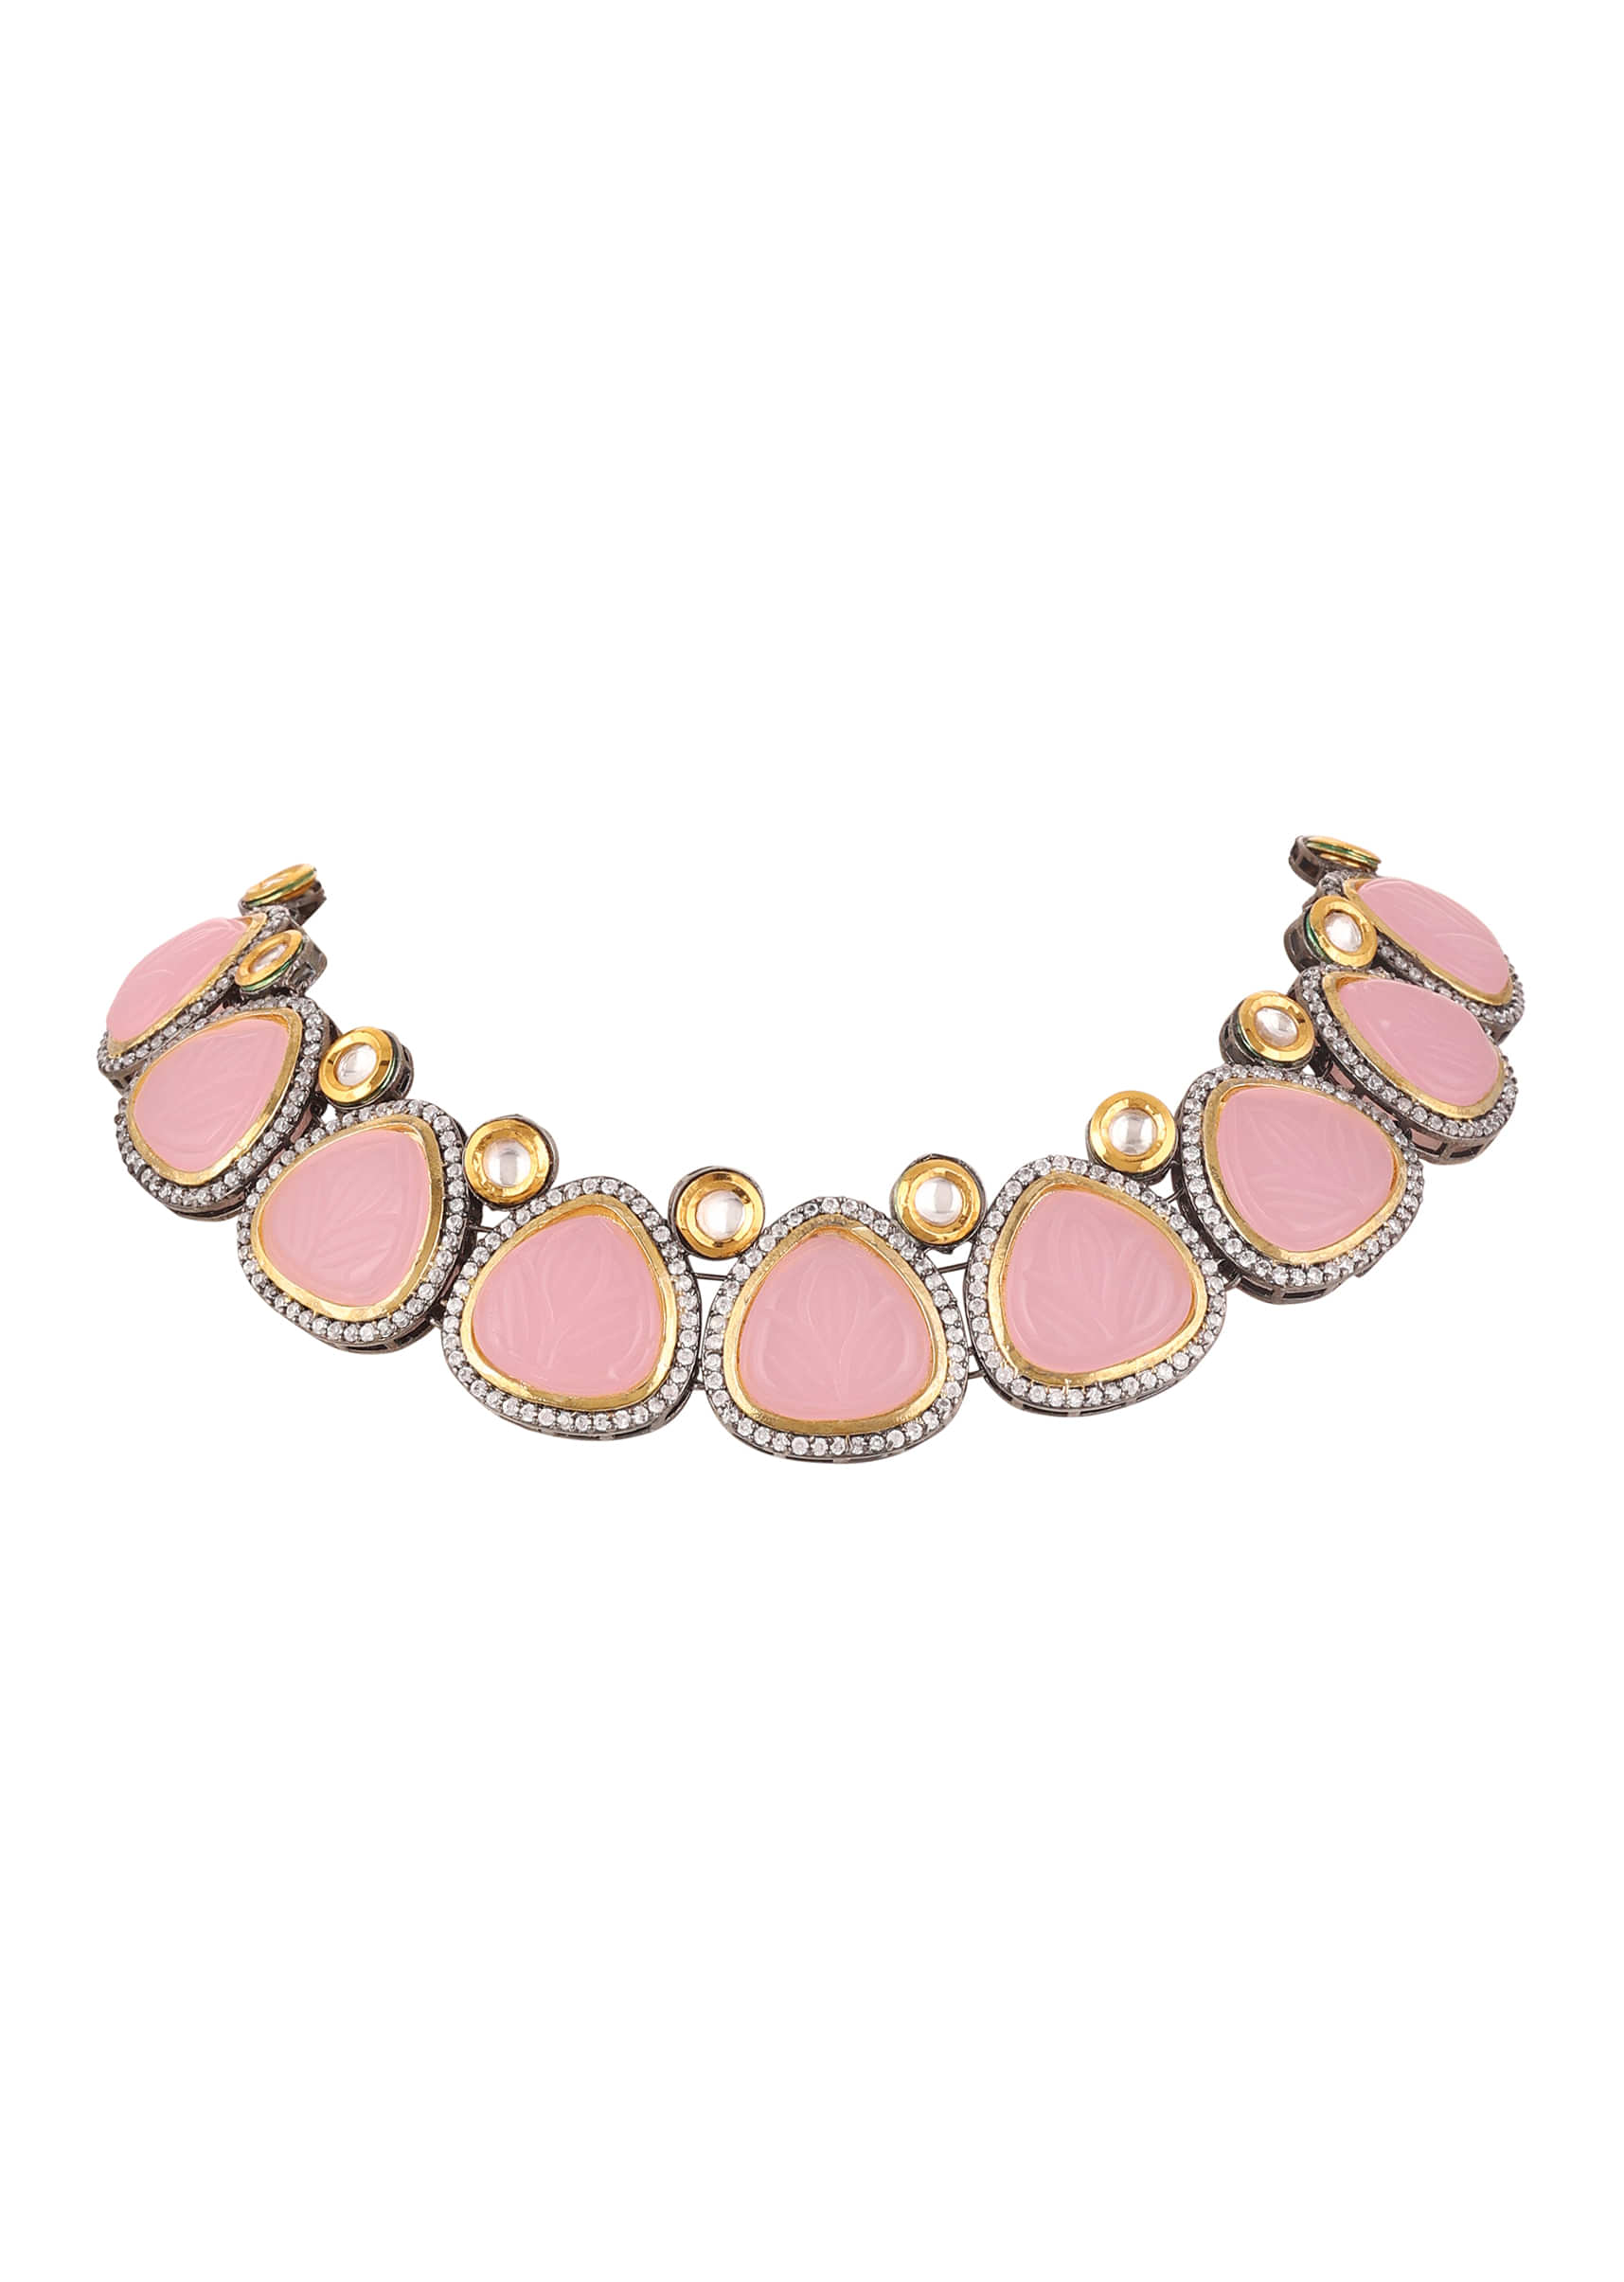 Carved Pink Stone Necklace Edged In Swarovski And Kundan